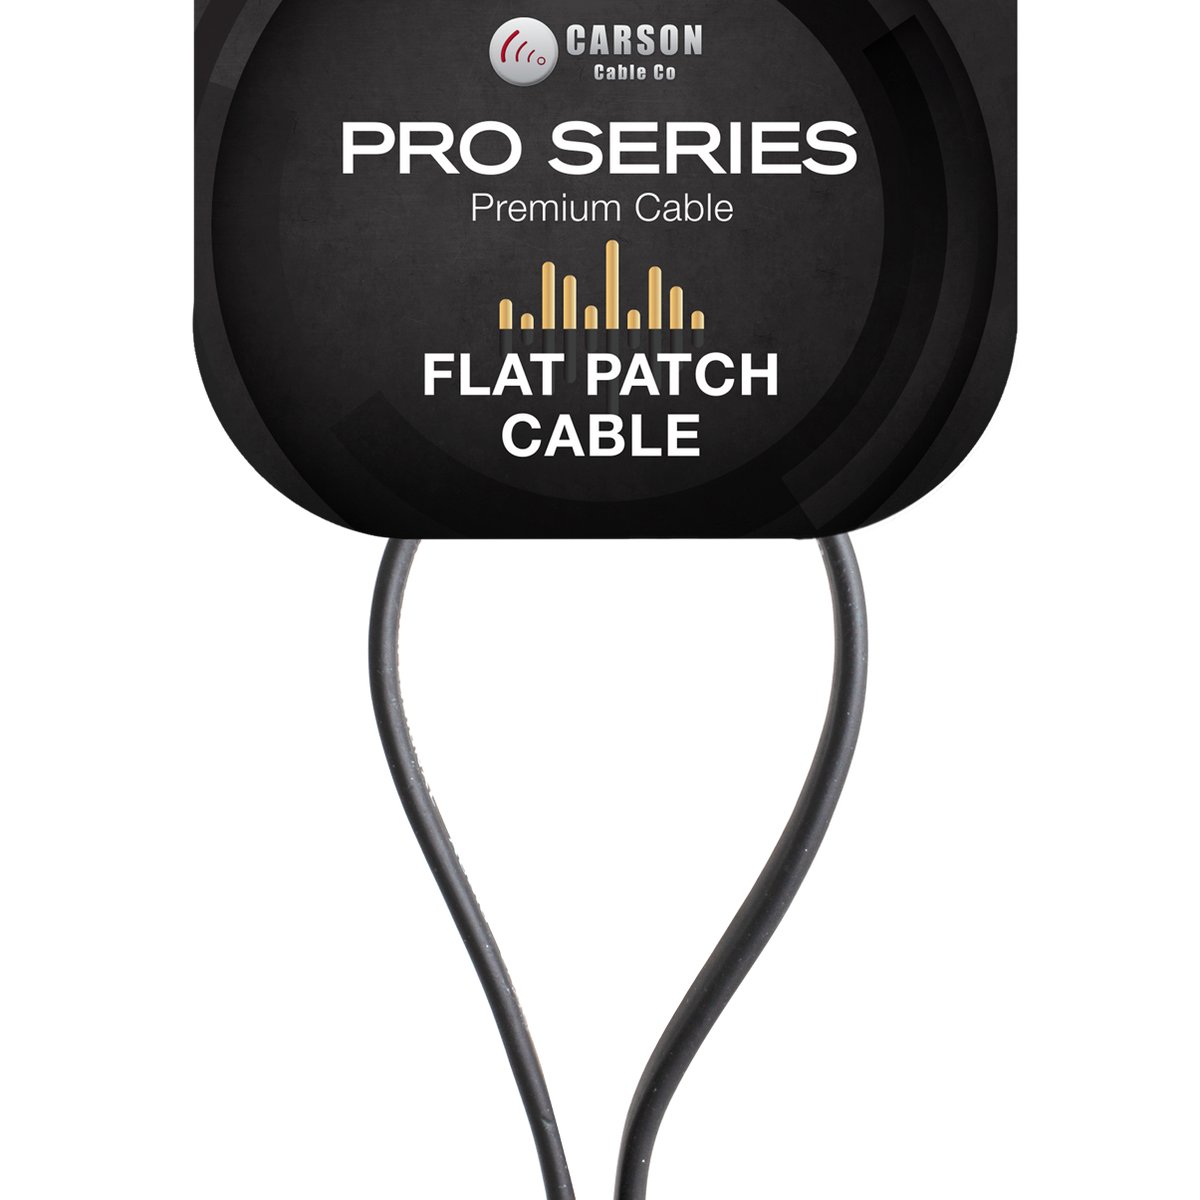 Carson 1 Ft Flat Patch Cable - Pro Series